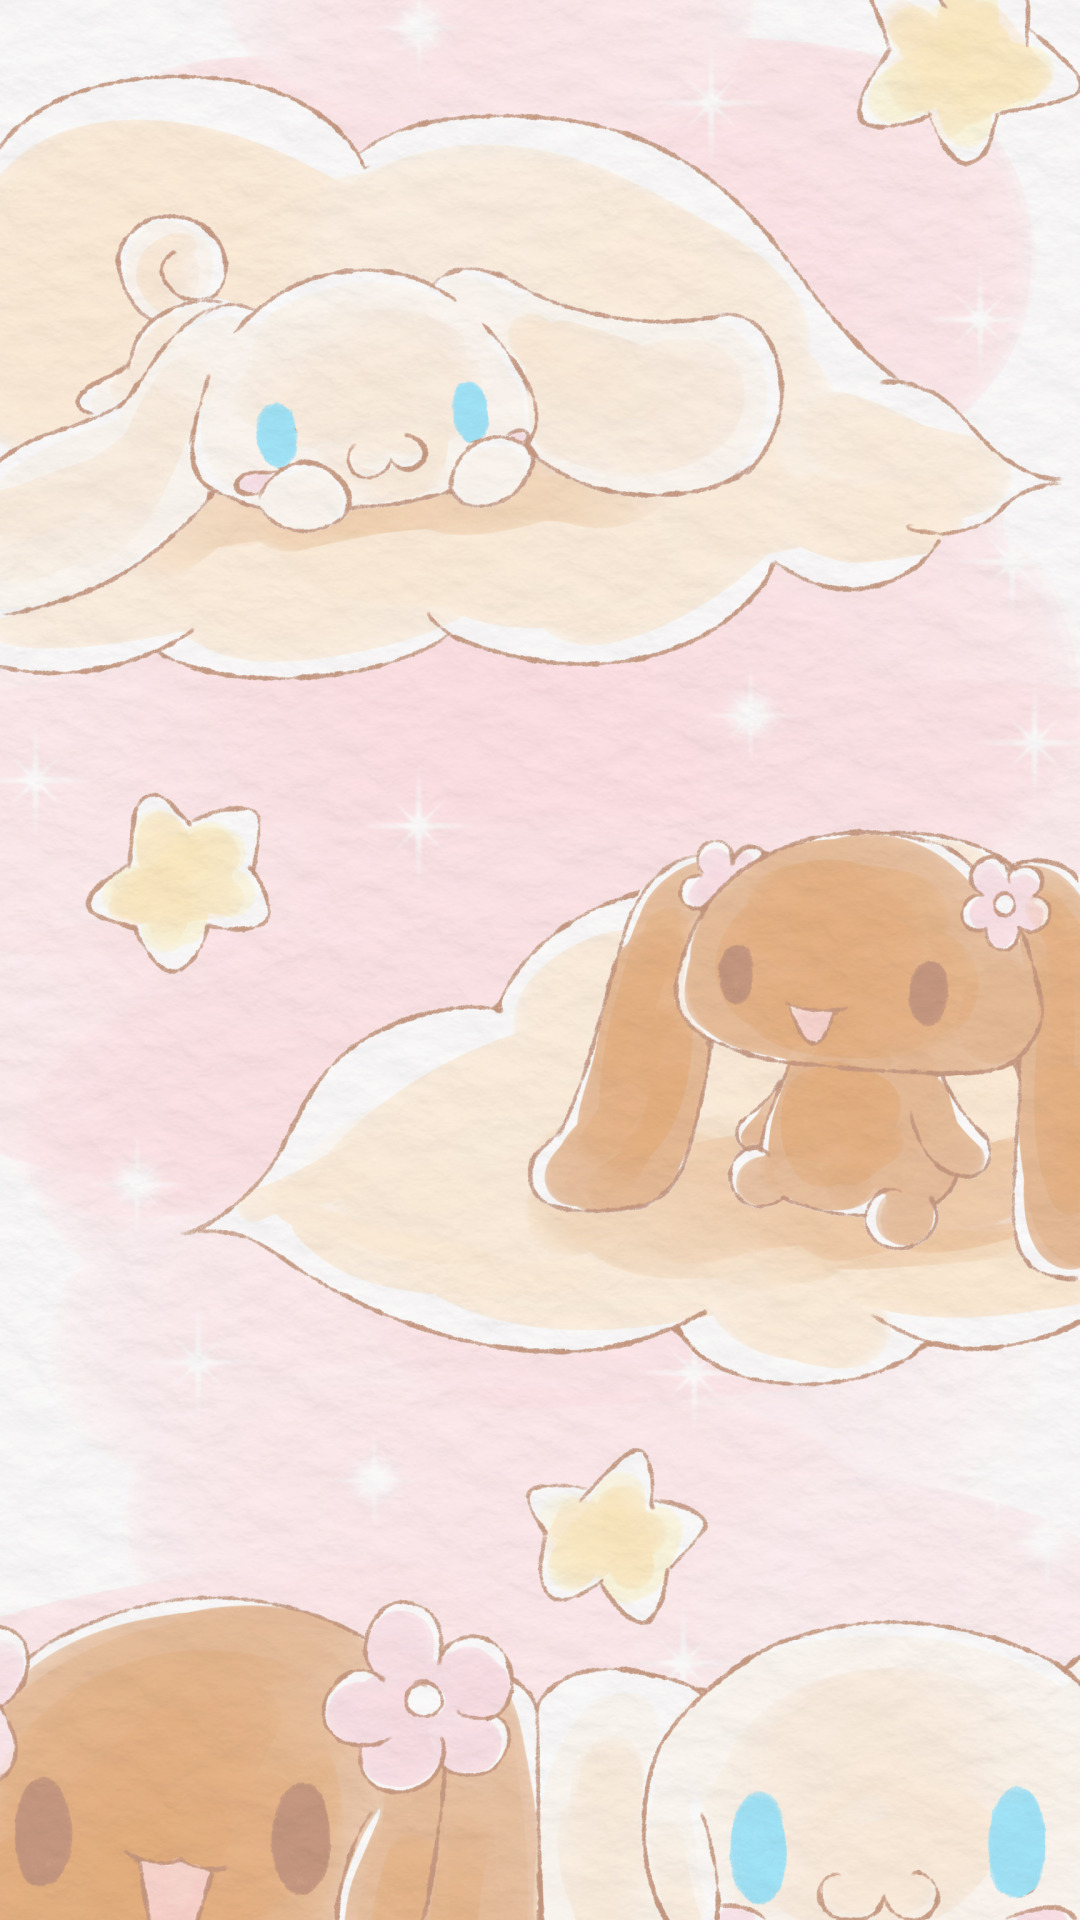 𝑑𝑟𝑒𝑎𝑚 𝑝𝑜𝑙𝑙𝑒𝑛 — sanrio wallpapers from last year